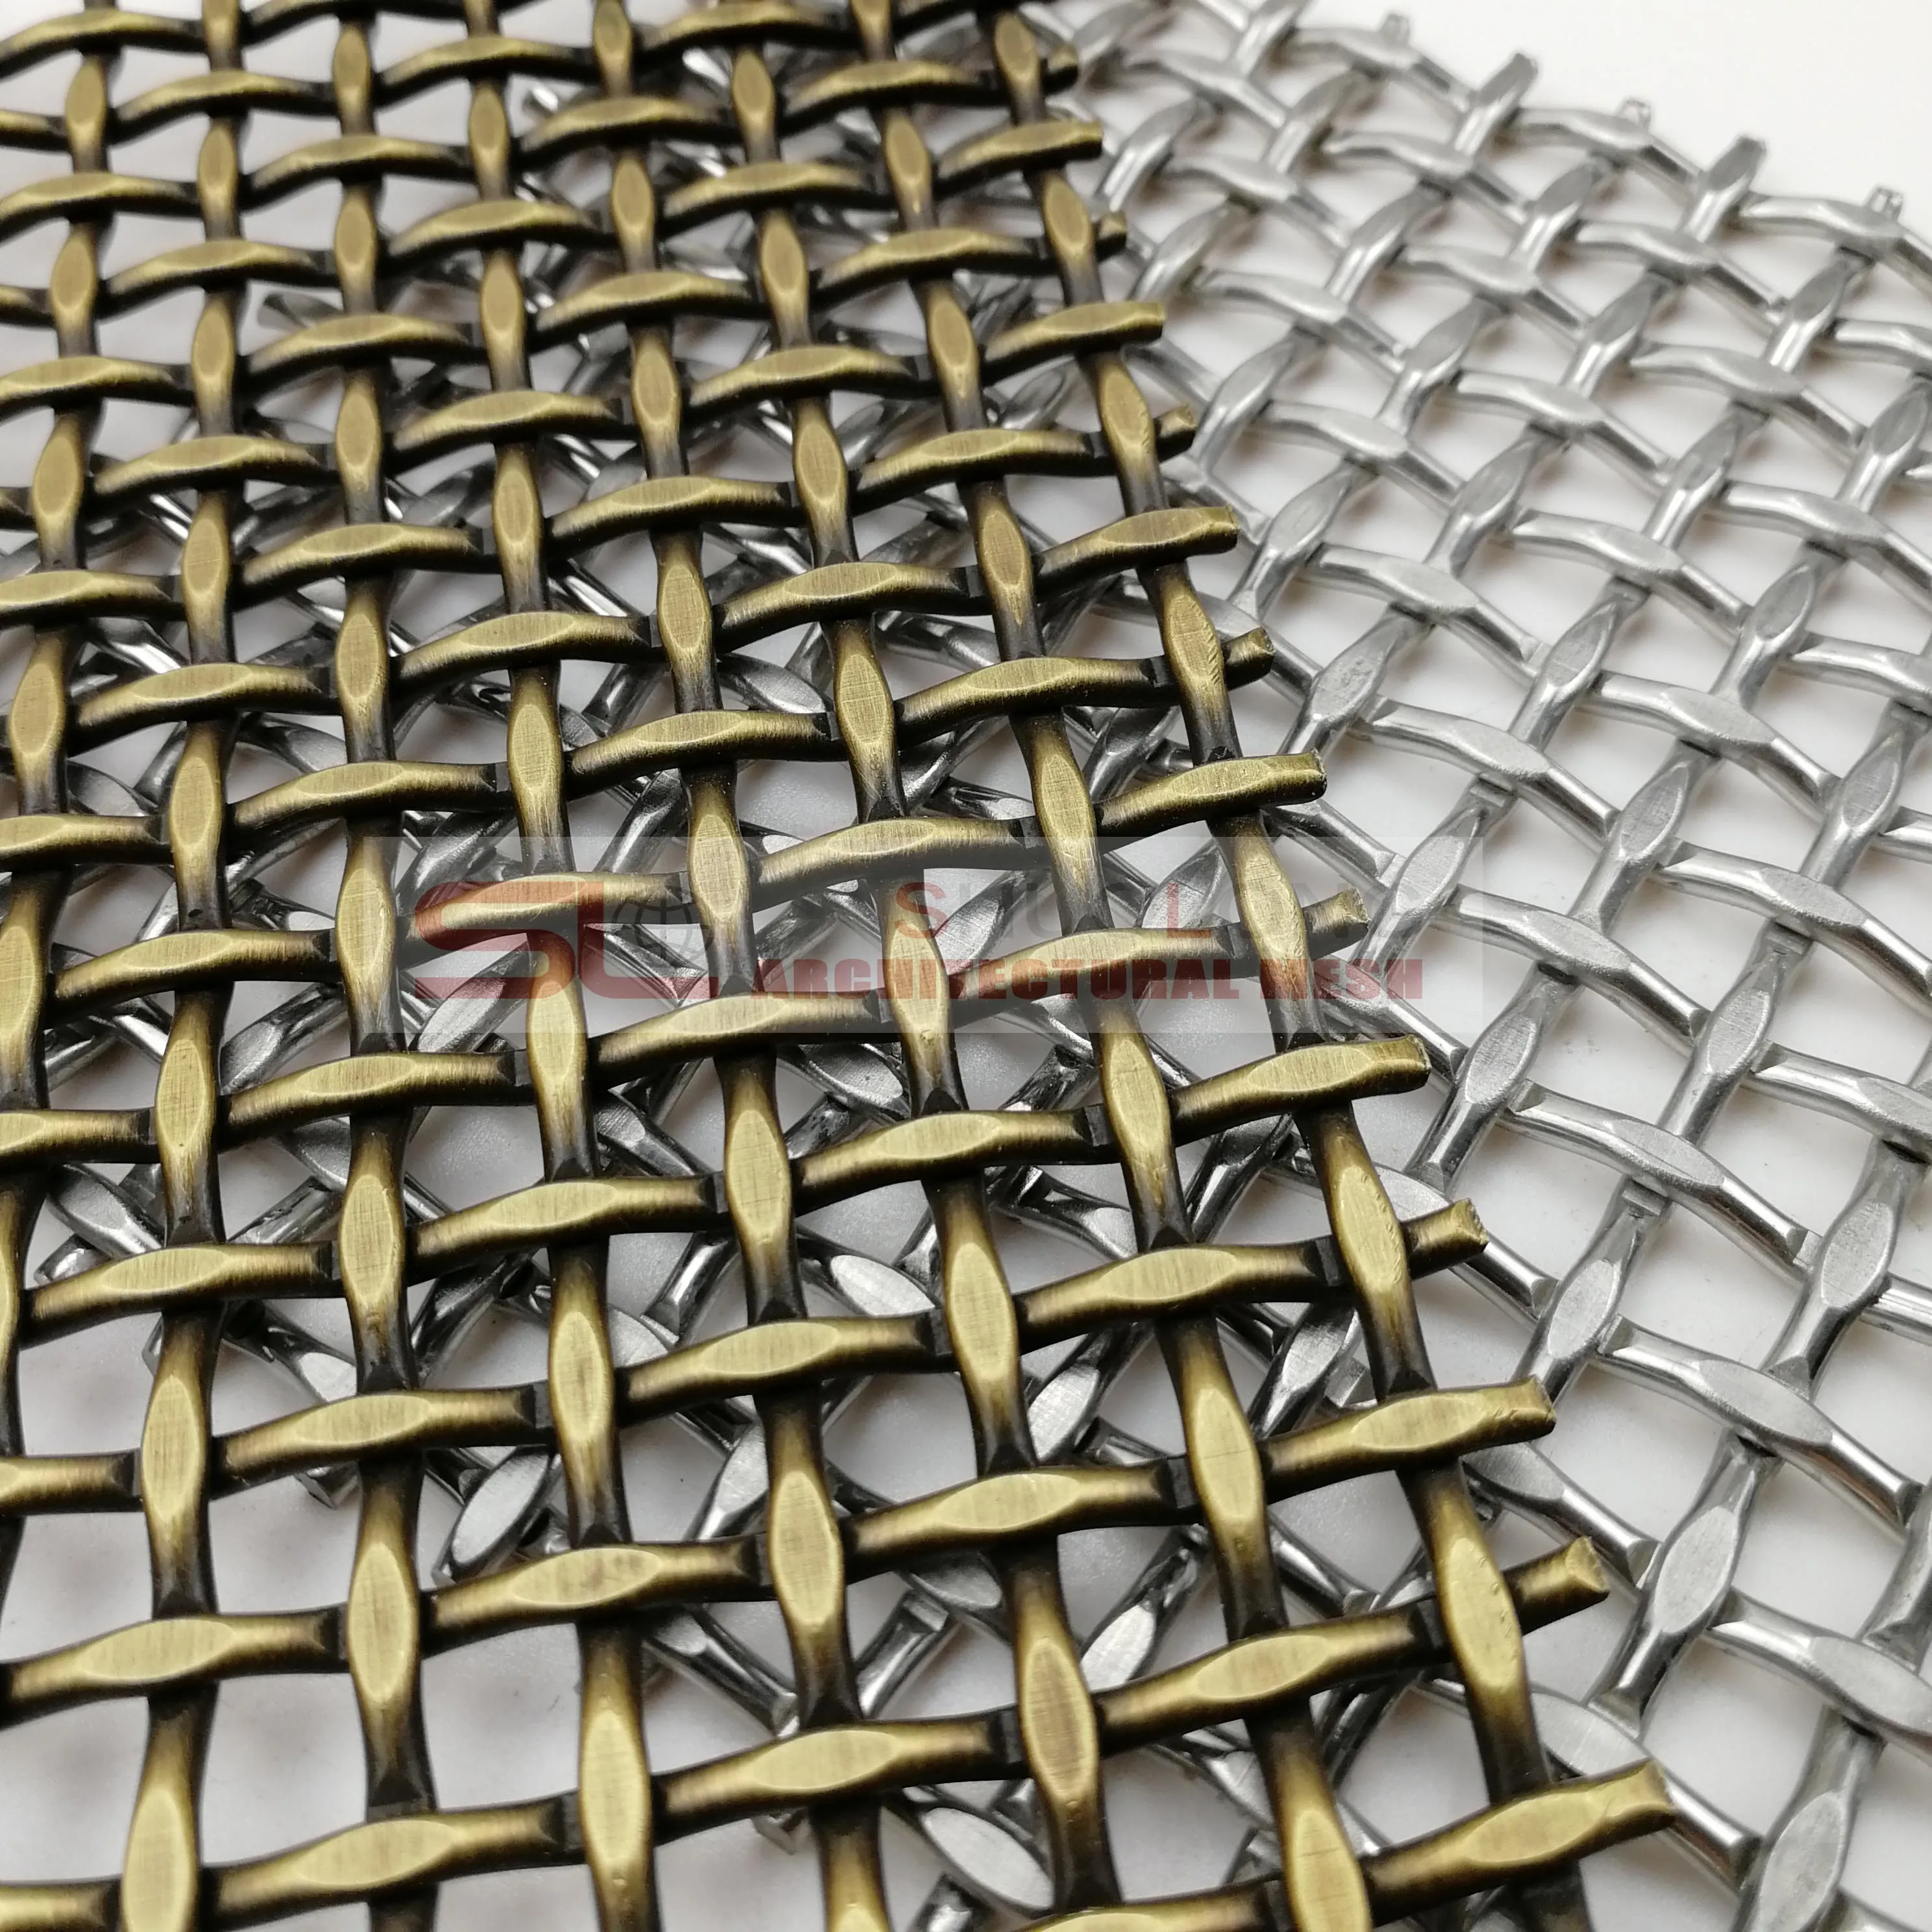 Stainless steel woven wire fabric - XY-3012 - Hebei Shuolong Metal